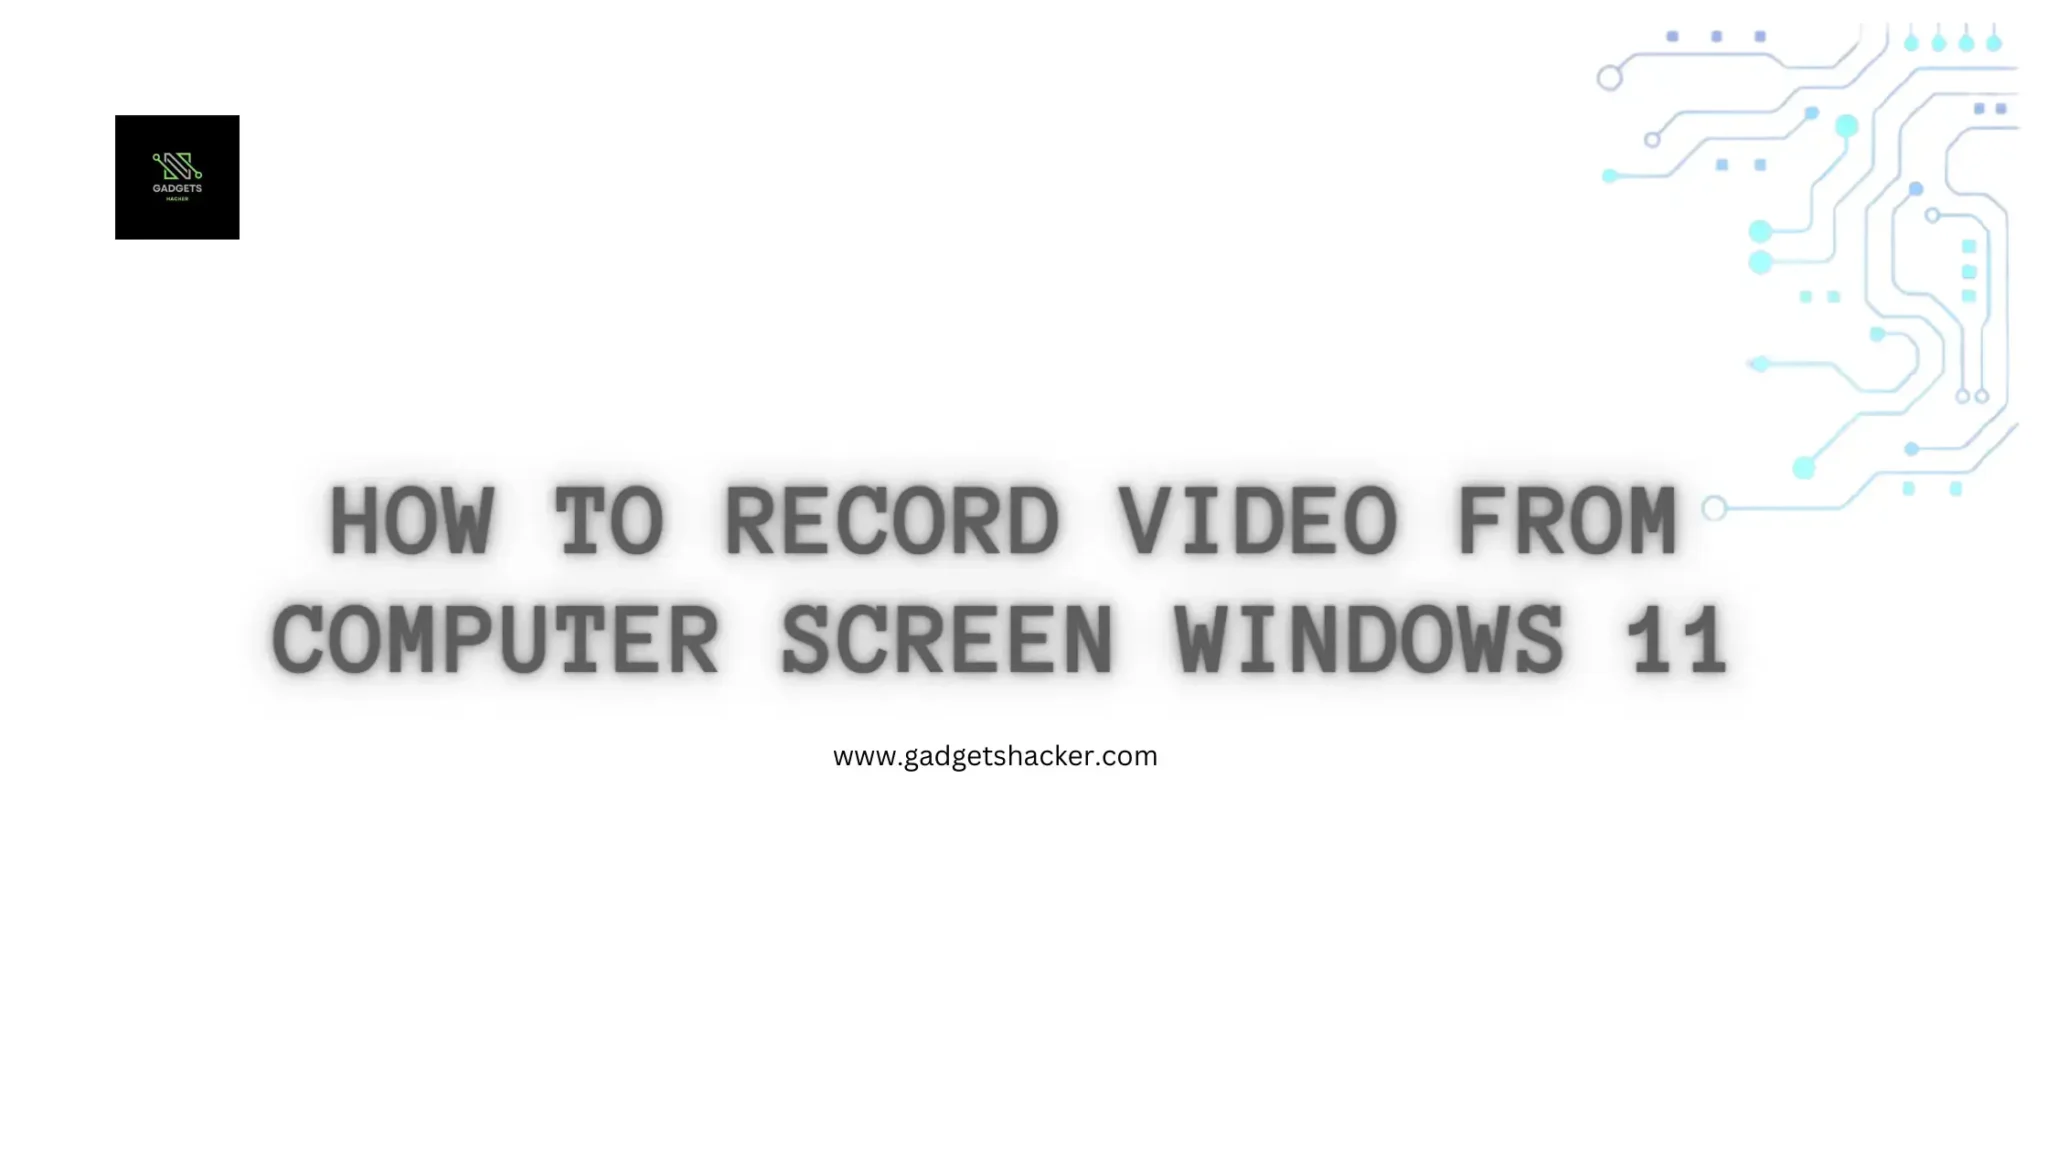 How to record video from computer screen Windows 11